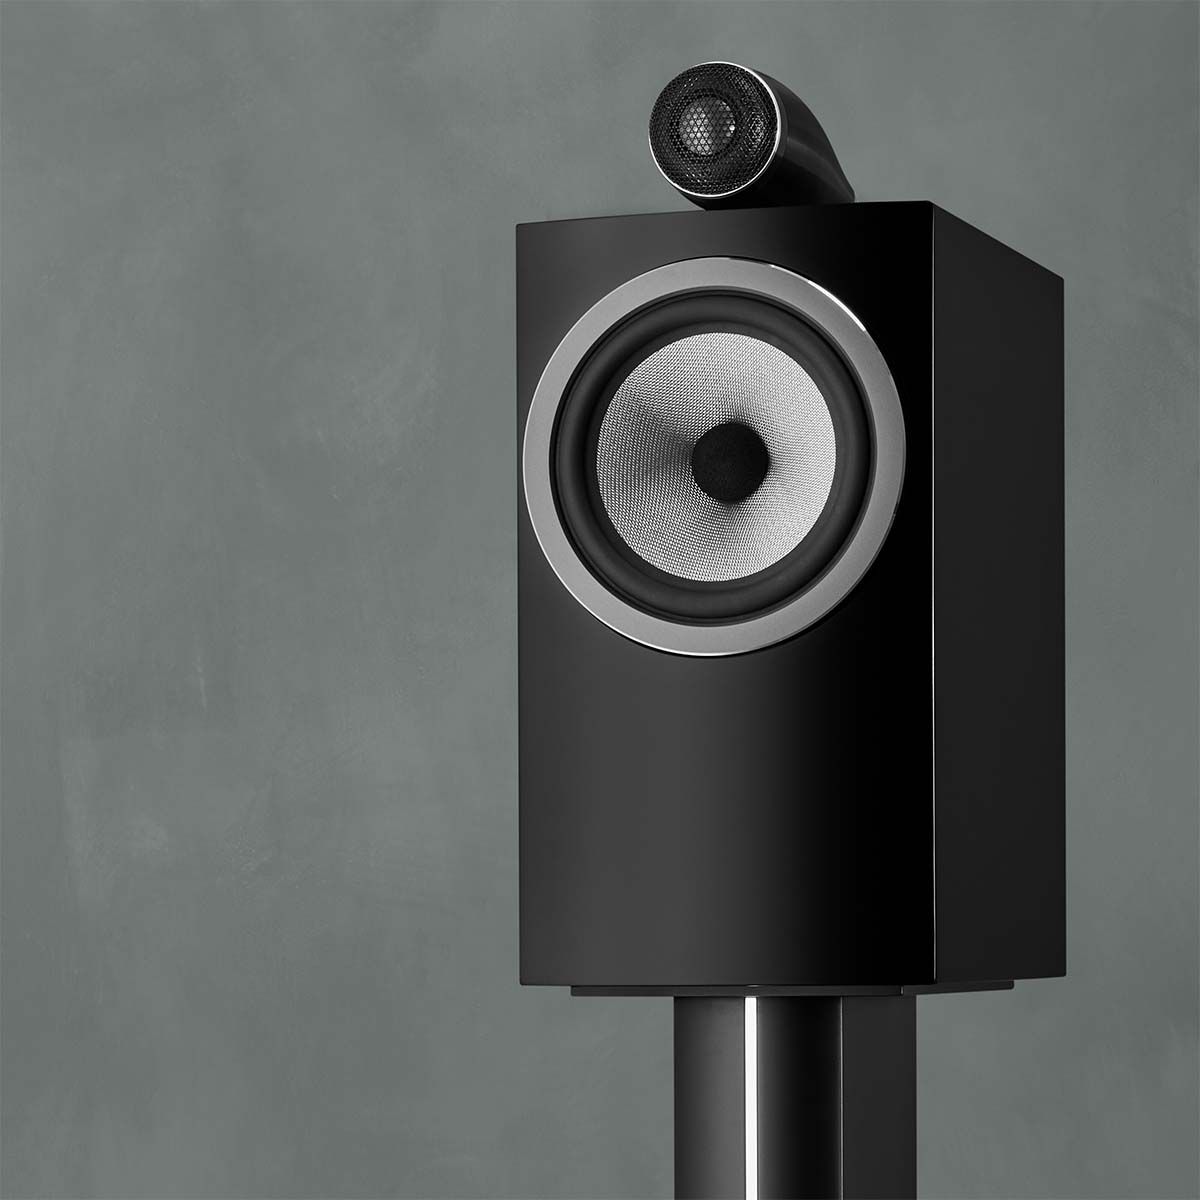 Bowers & Wilkins 705 S3 2-Way Stand Mount Bookshelf Loudspeakers - lifestyle shot in black at an angle